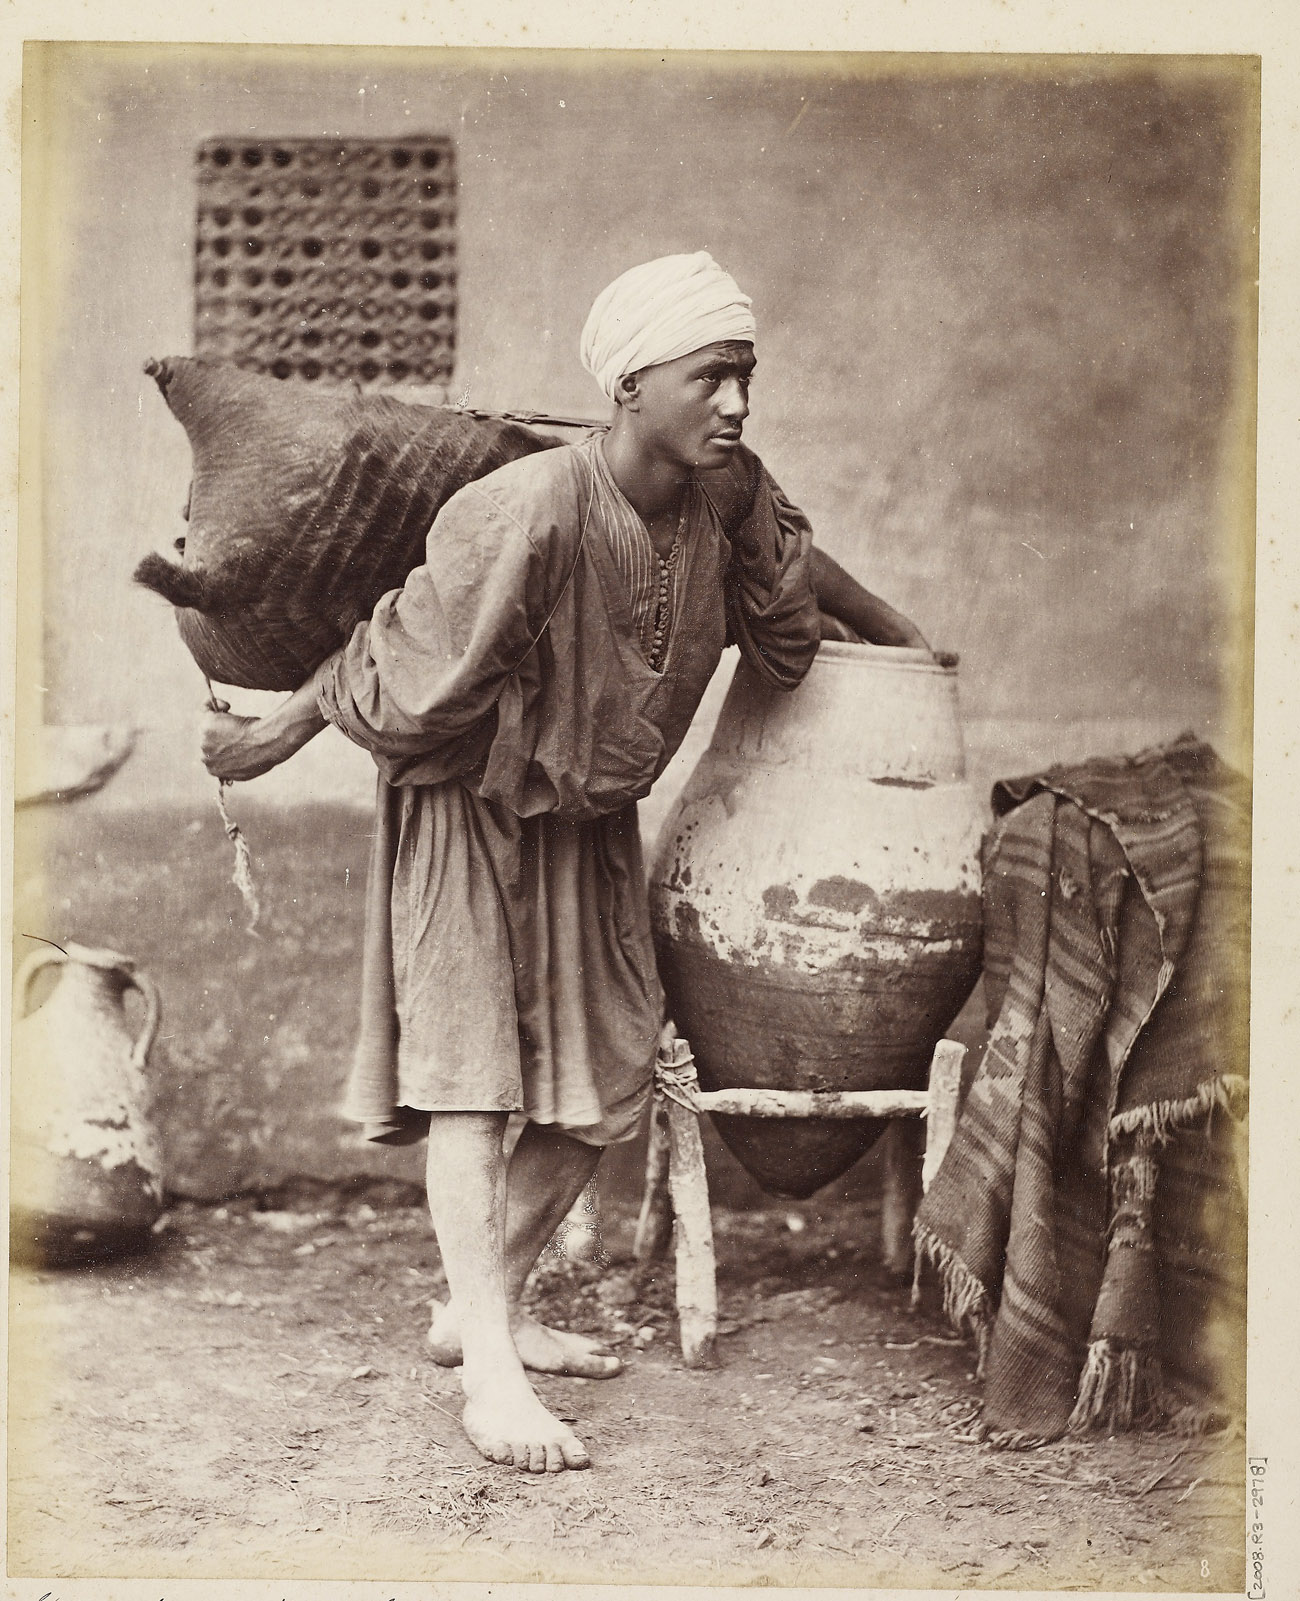 Sakkah (water carrier), Egypt, about 1872, Otto Schoefft. Albumen print mounted on period card, 24.7 x 19.5 cm. The Getty Research Institute, 2008.R.3. Ken and Jenny Jacobson Orientalist Photography Collection